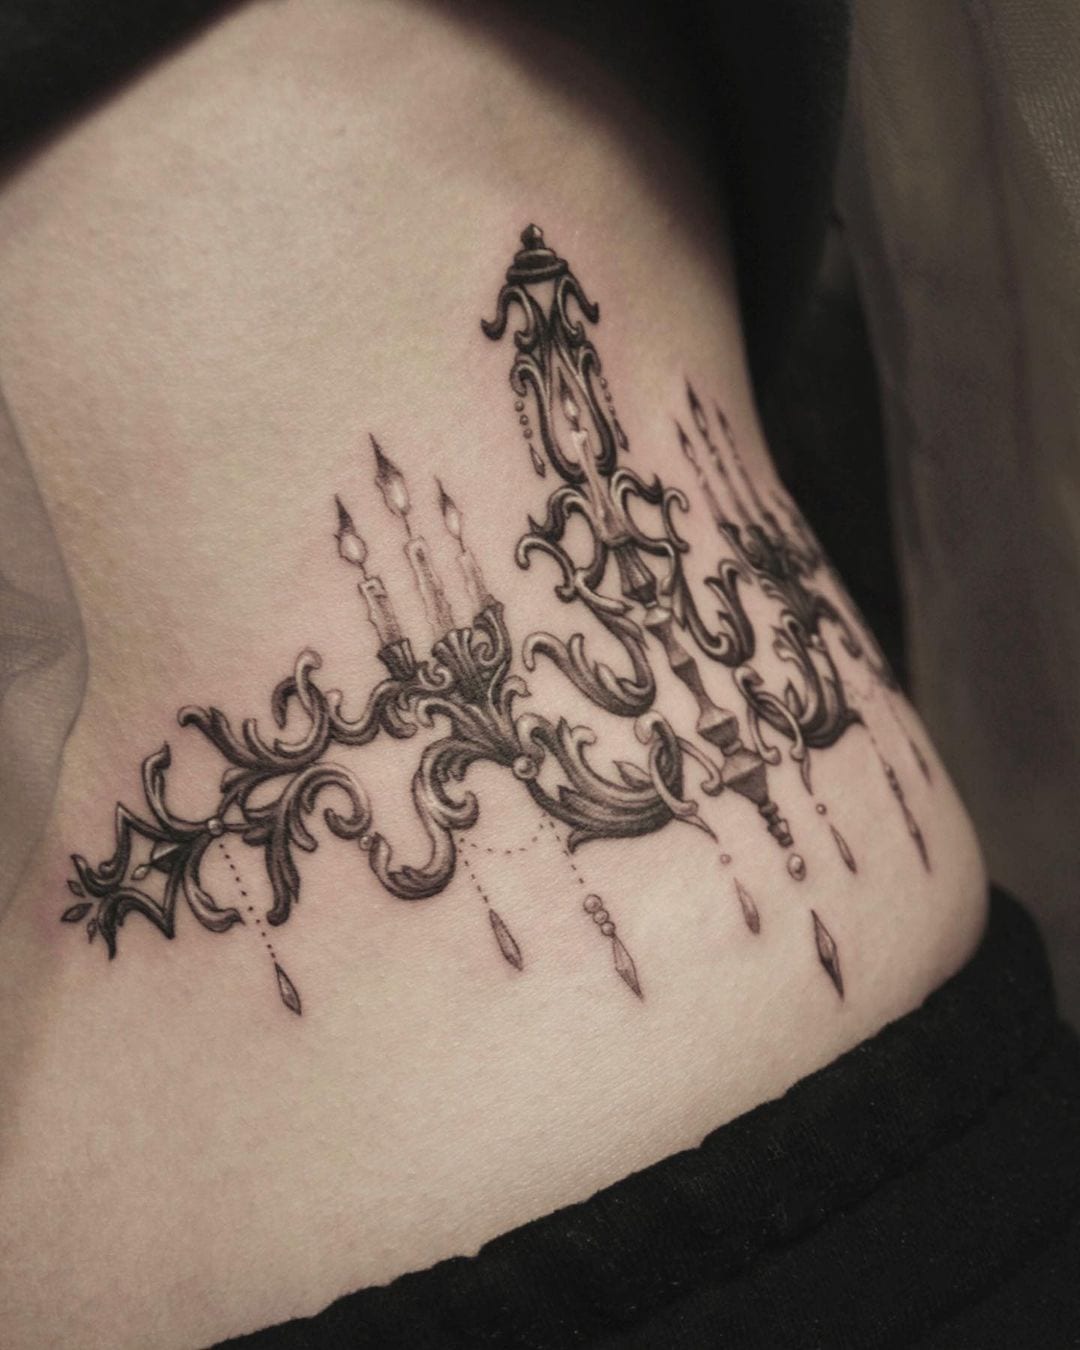 Top 20 chandelier tattoos that will knock your socks off!